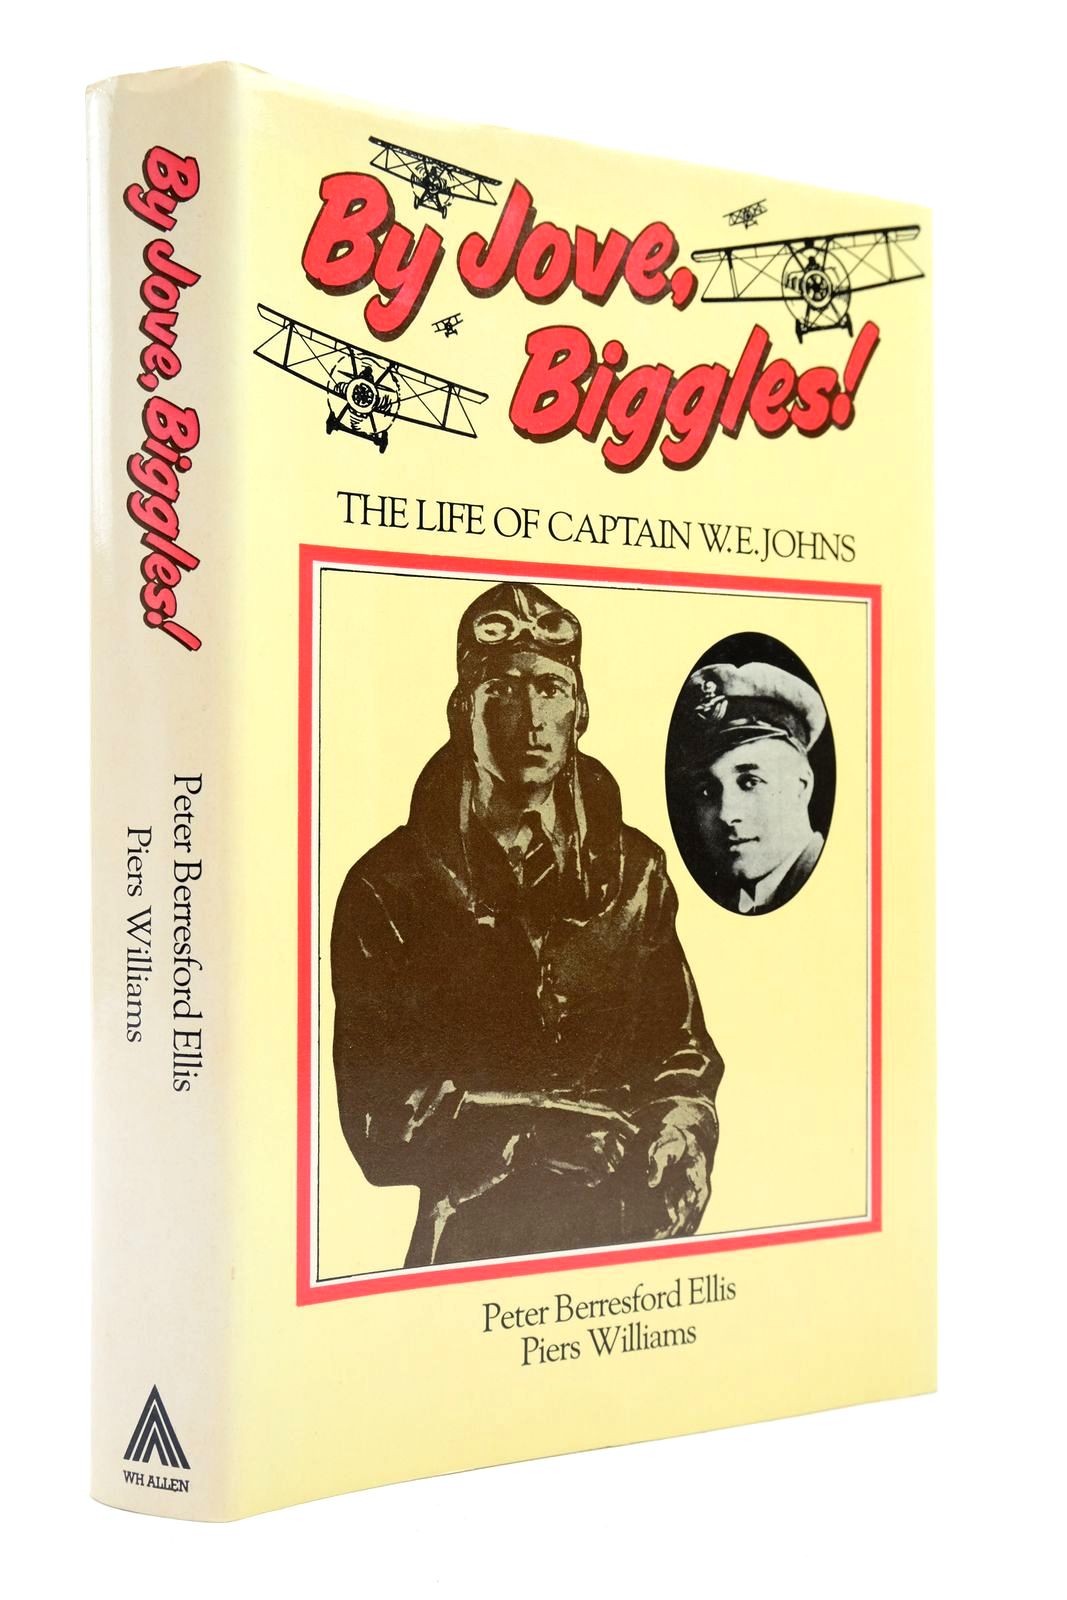 Photo of BY JOVE, BIGGLES! written by Ellis, Peter Berresford
Williams, Piers published by W.H. Allen (STOCK CODE: 2139798)  for sale by Stella & Rose's Books